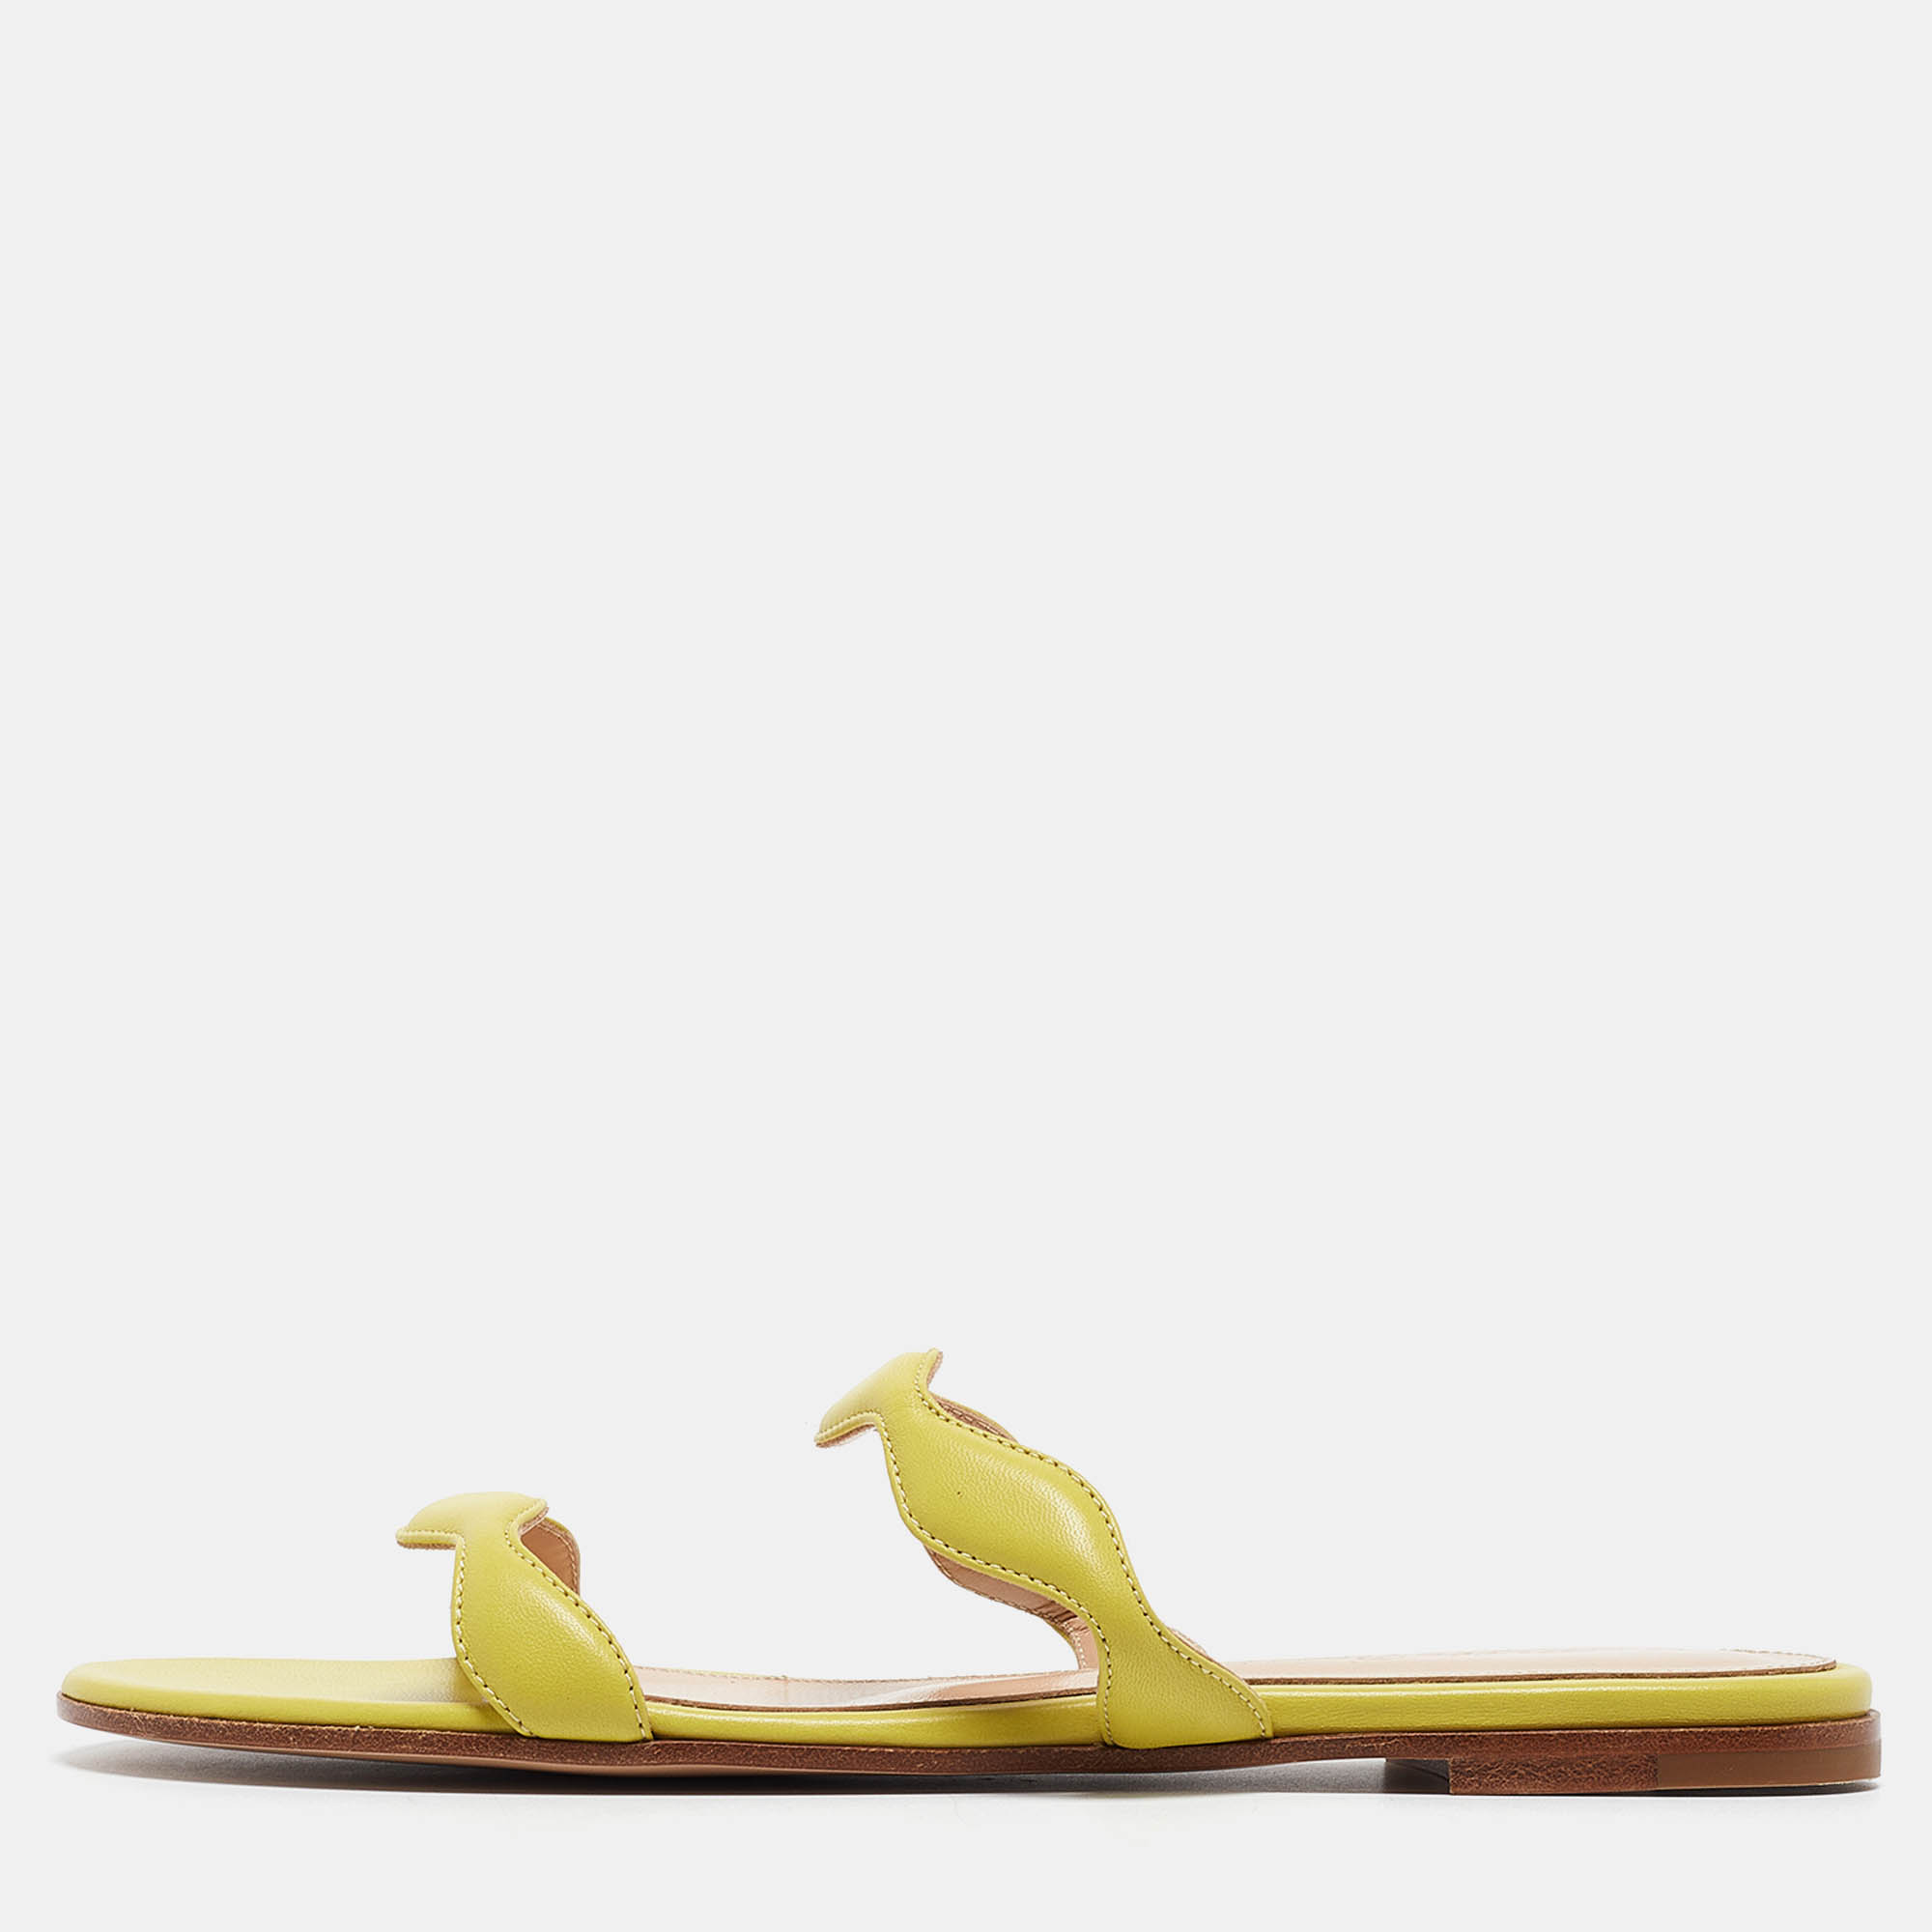 Gianvito rossi yellow leather wavy flat slides size 37